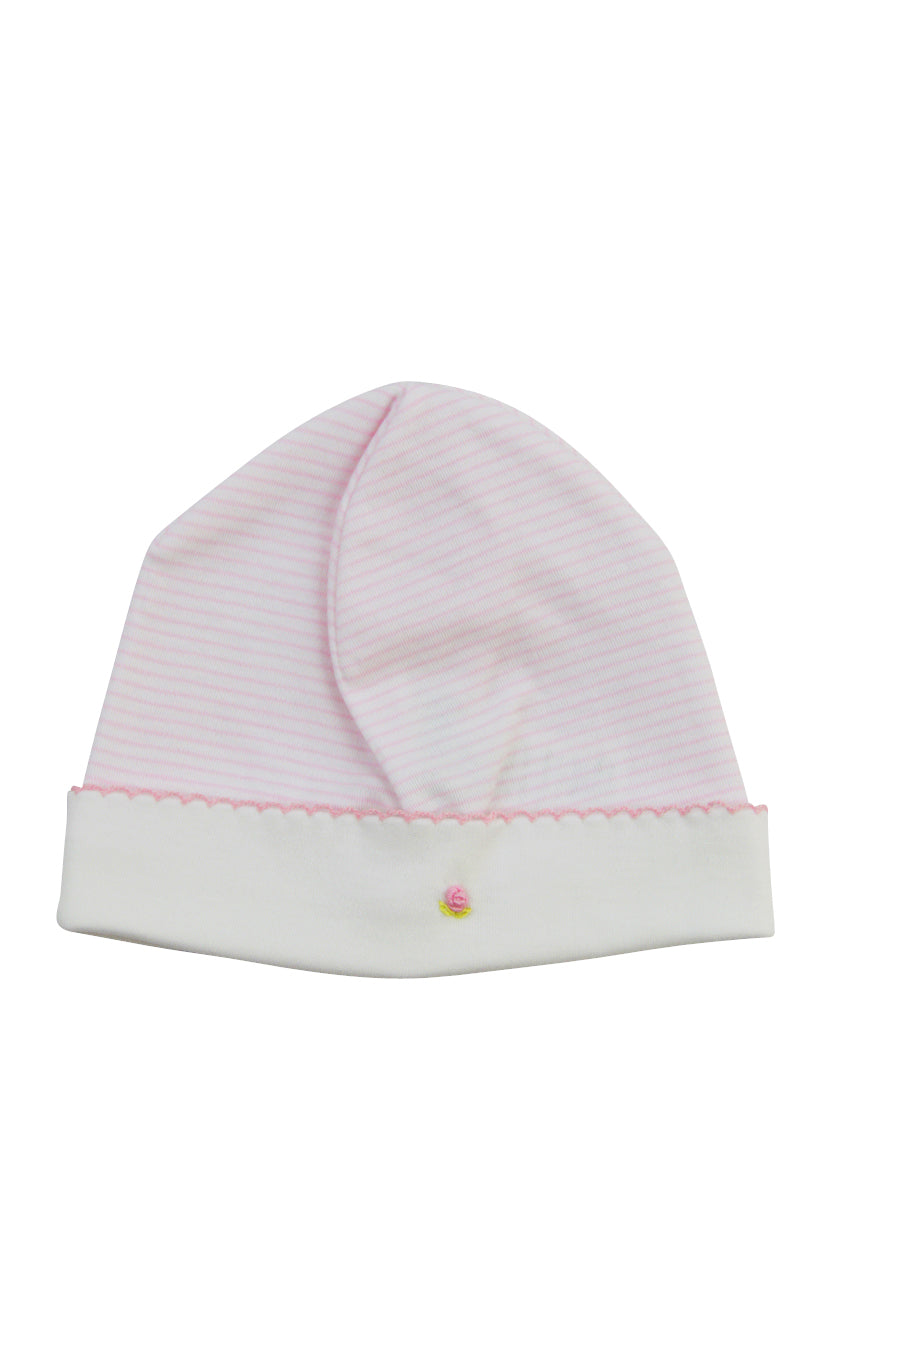 Baby Girl's Pink Striped Rose Hat - Little Threads Inc. Children's Clothing